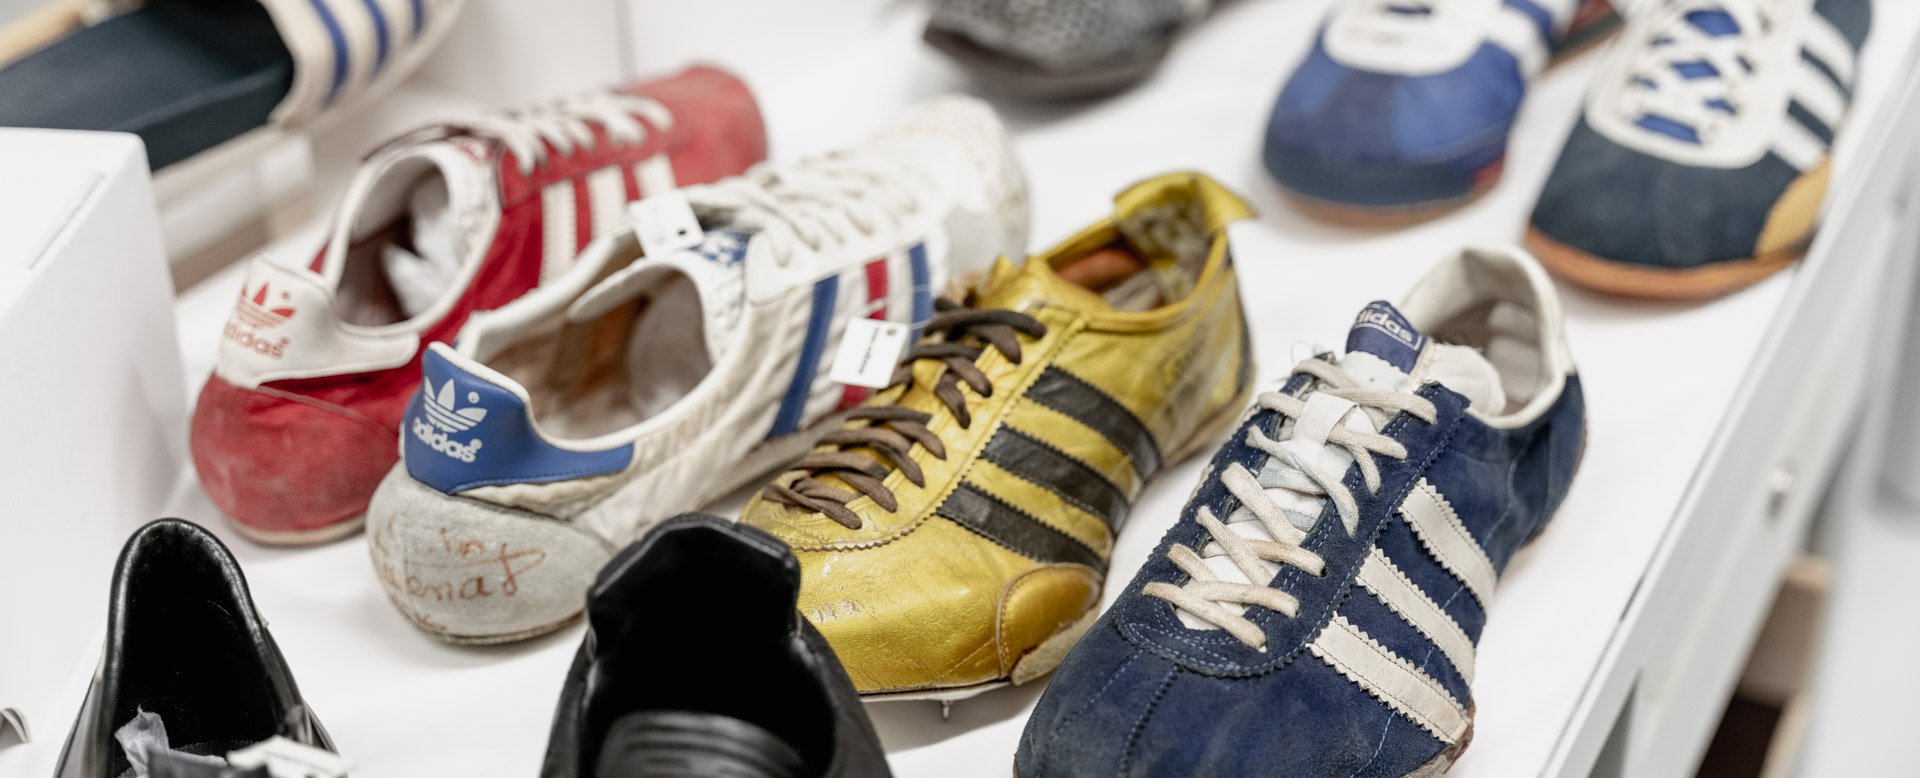 Adidas, History, Products, & Facts